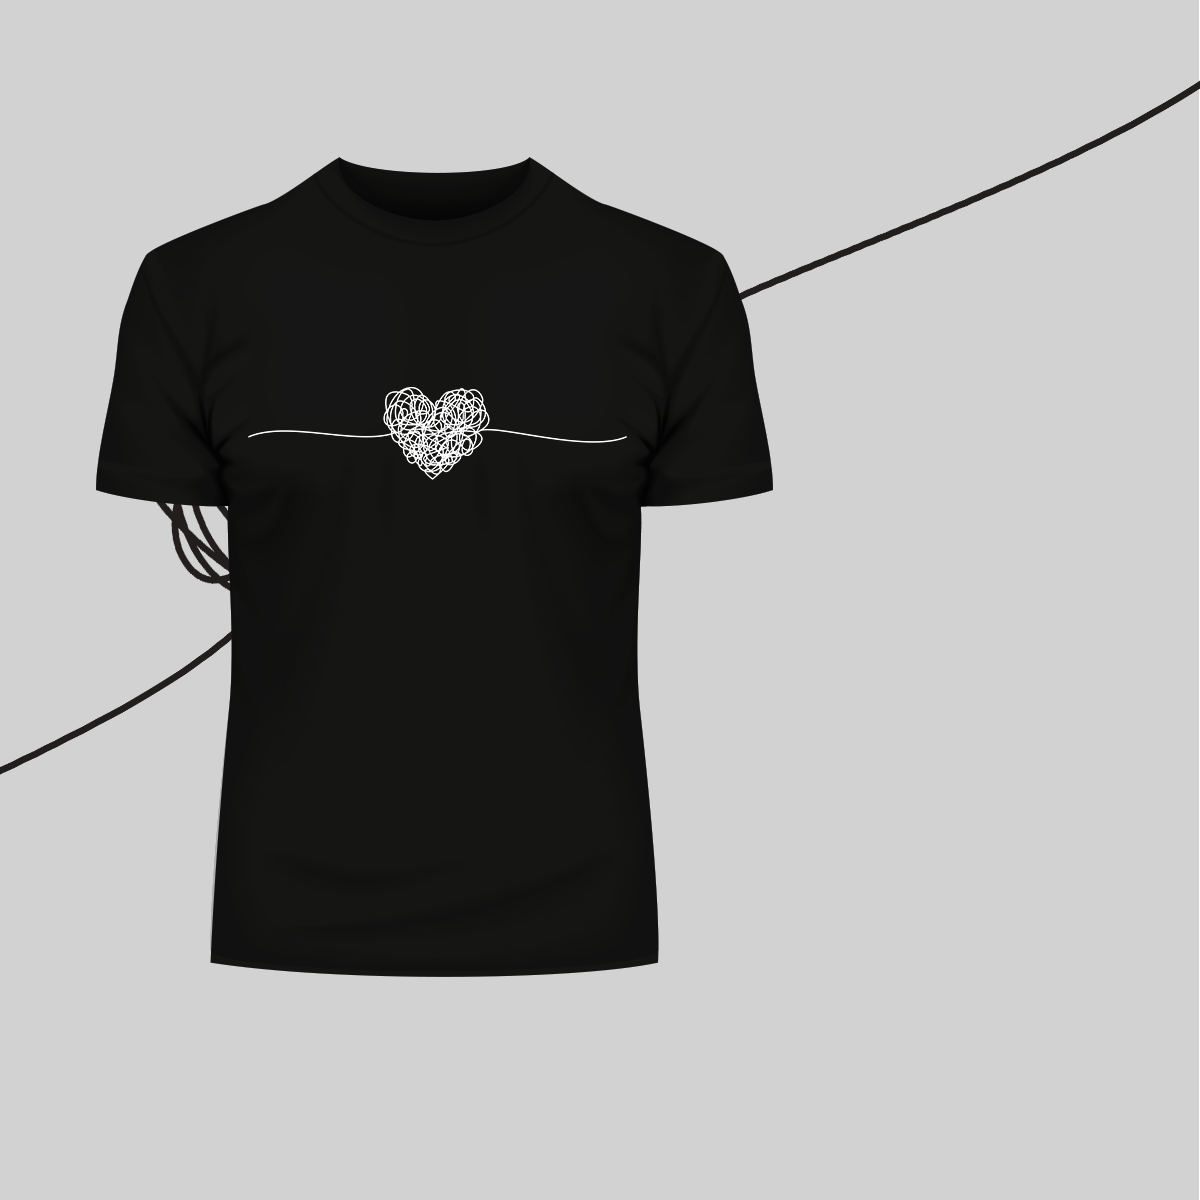 Tangled way to the heart - hand drawn scribble Valentines T-shirt edition - Kuzi Tees